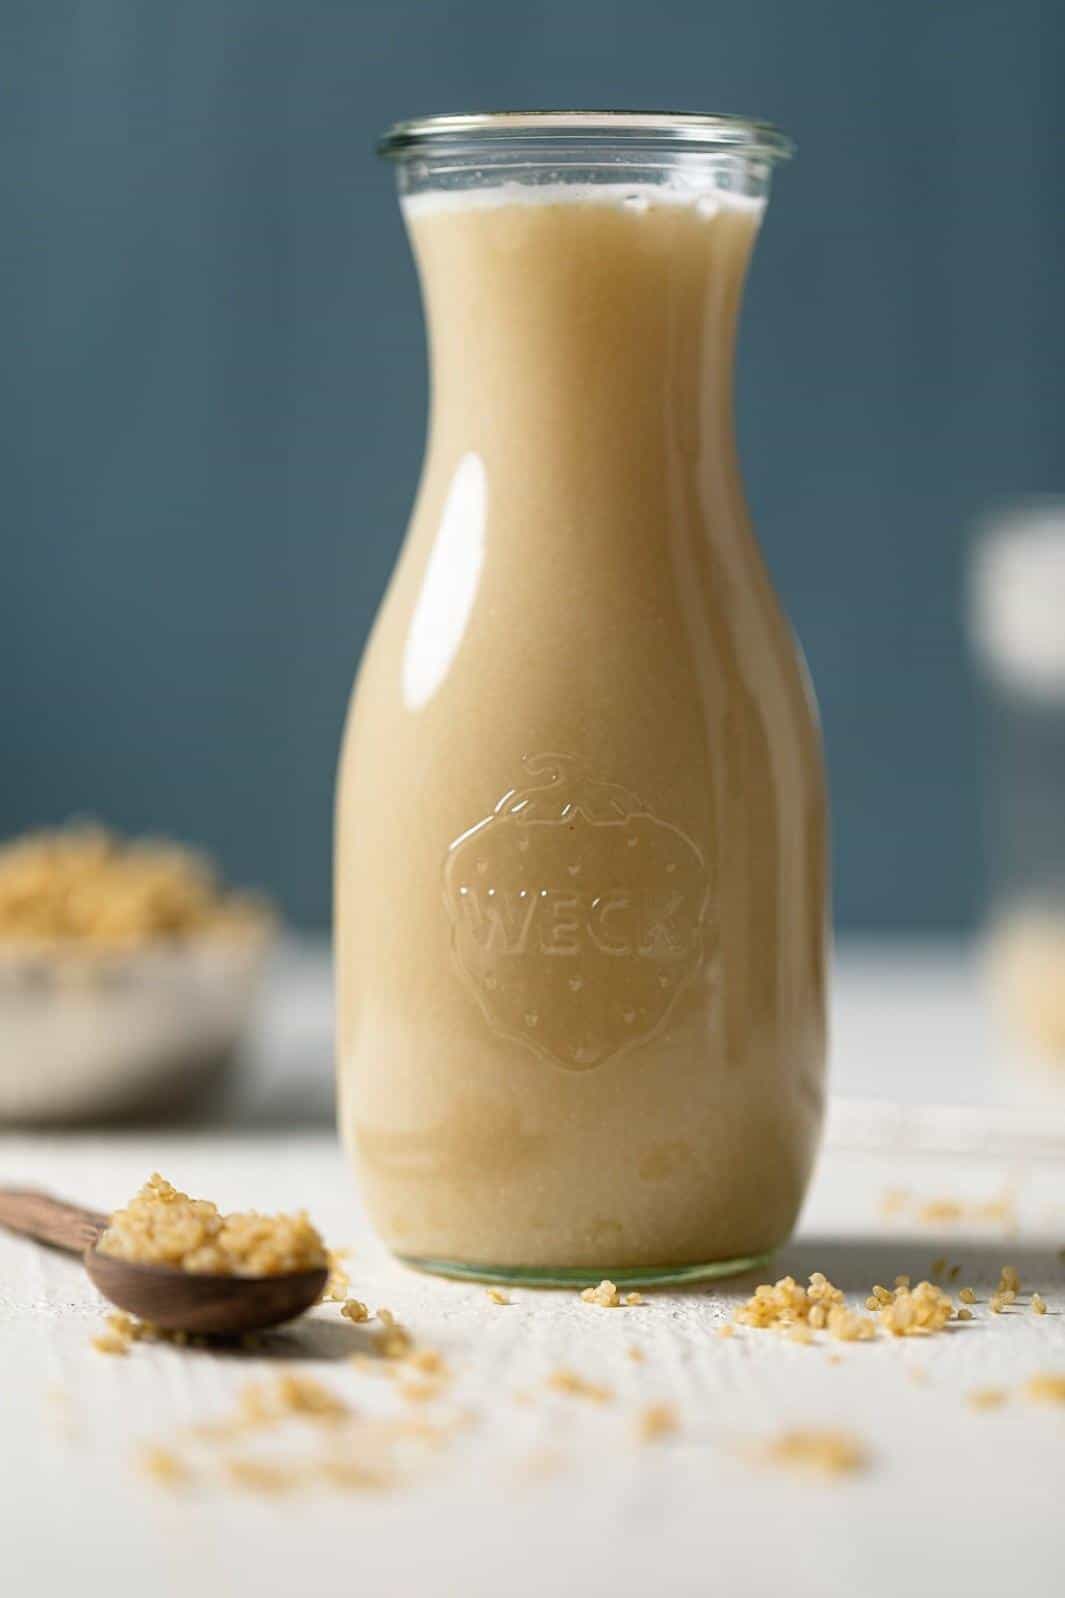  Making your own plant-based milk has never been this easy!